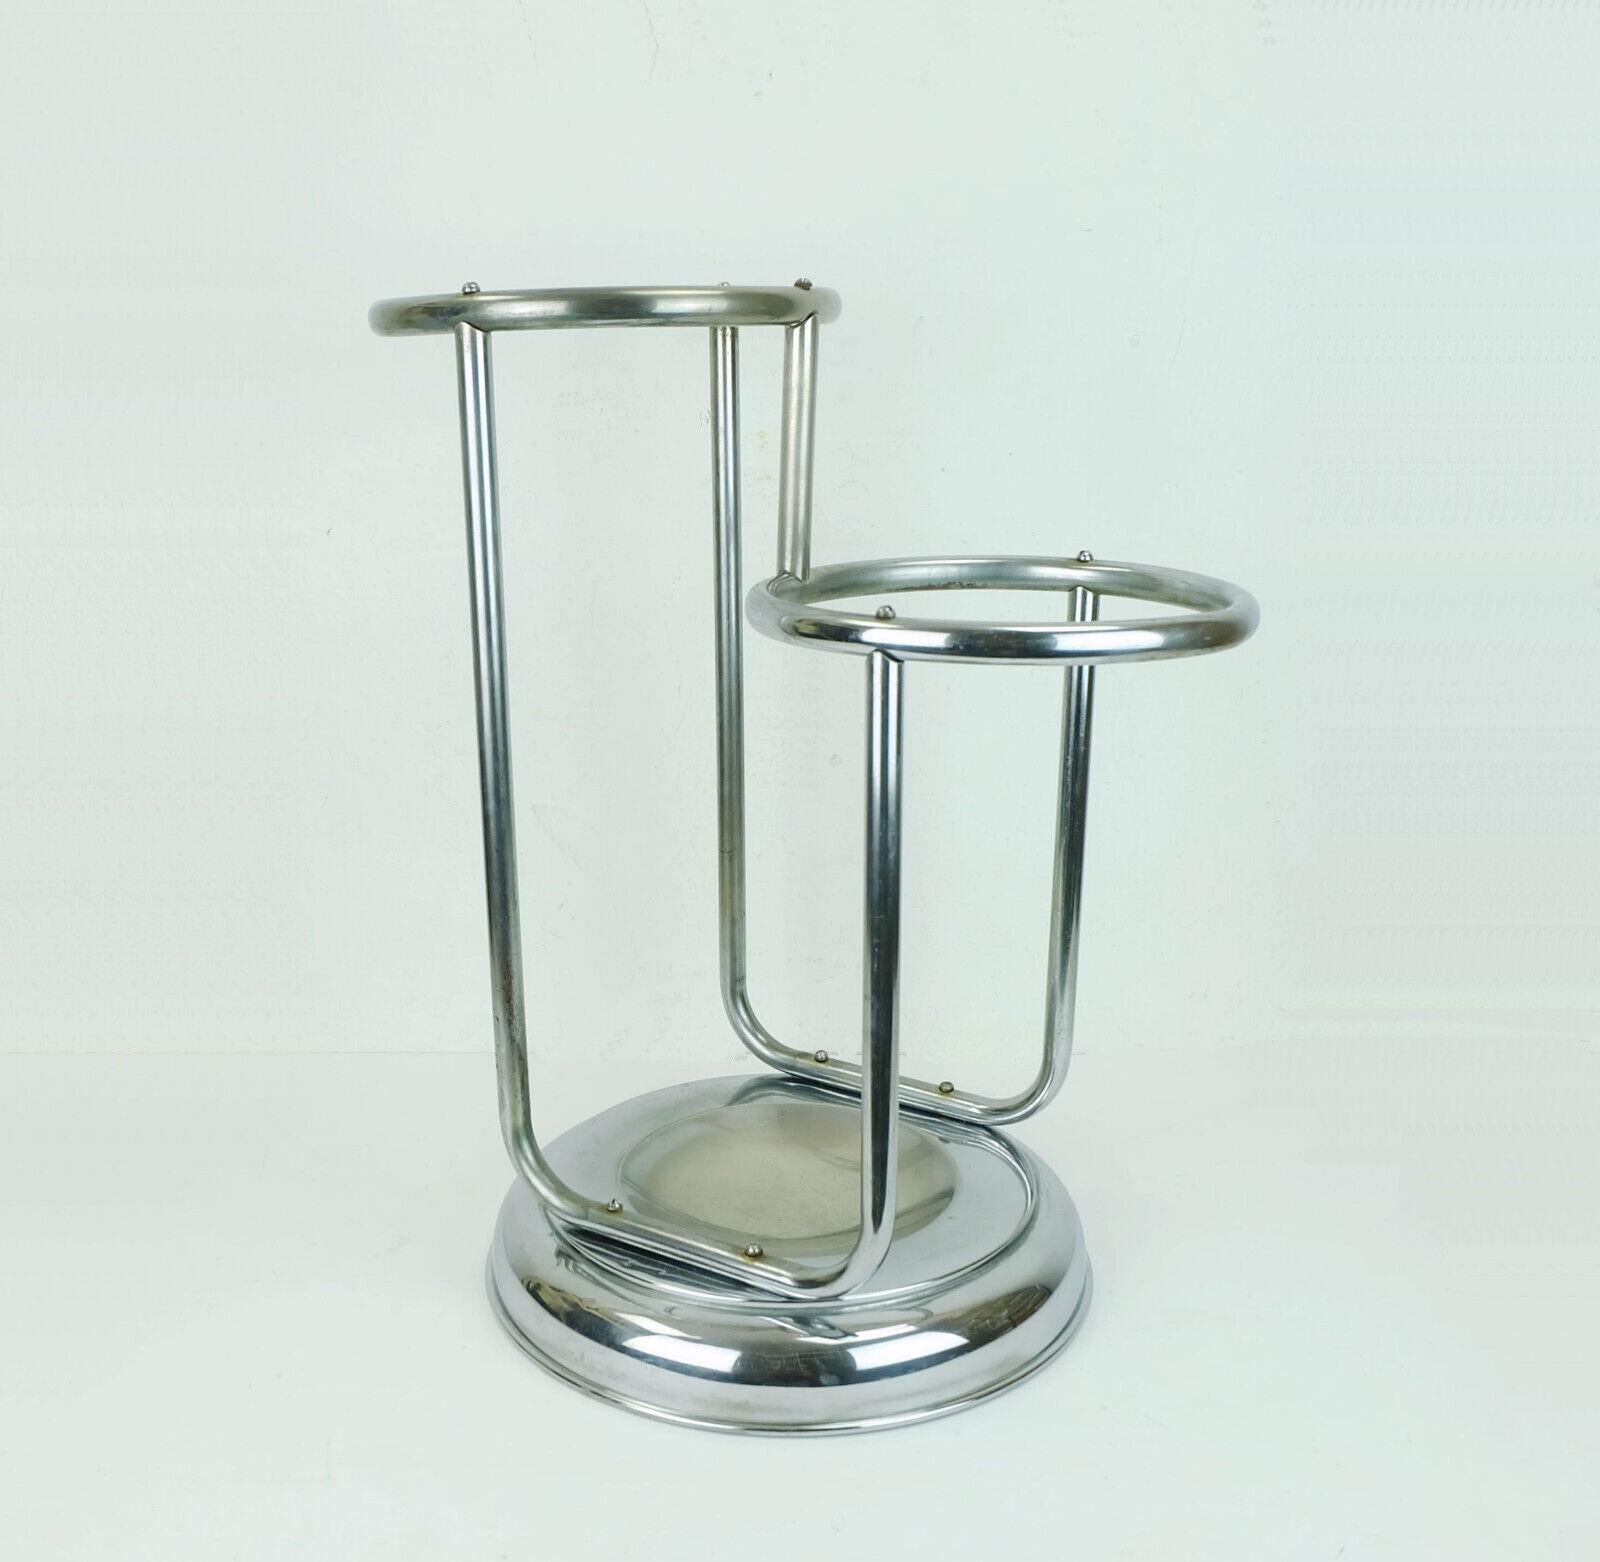 1930s art deco UMBRELLA STAND chrome plated metal For Sale 1